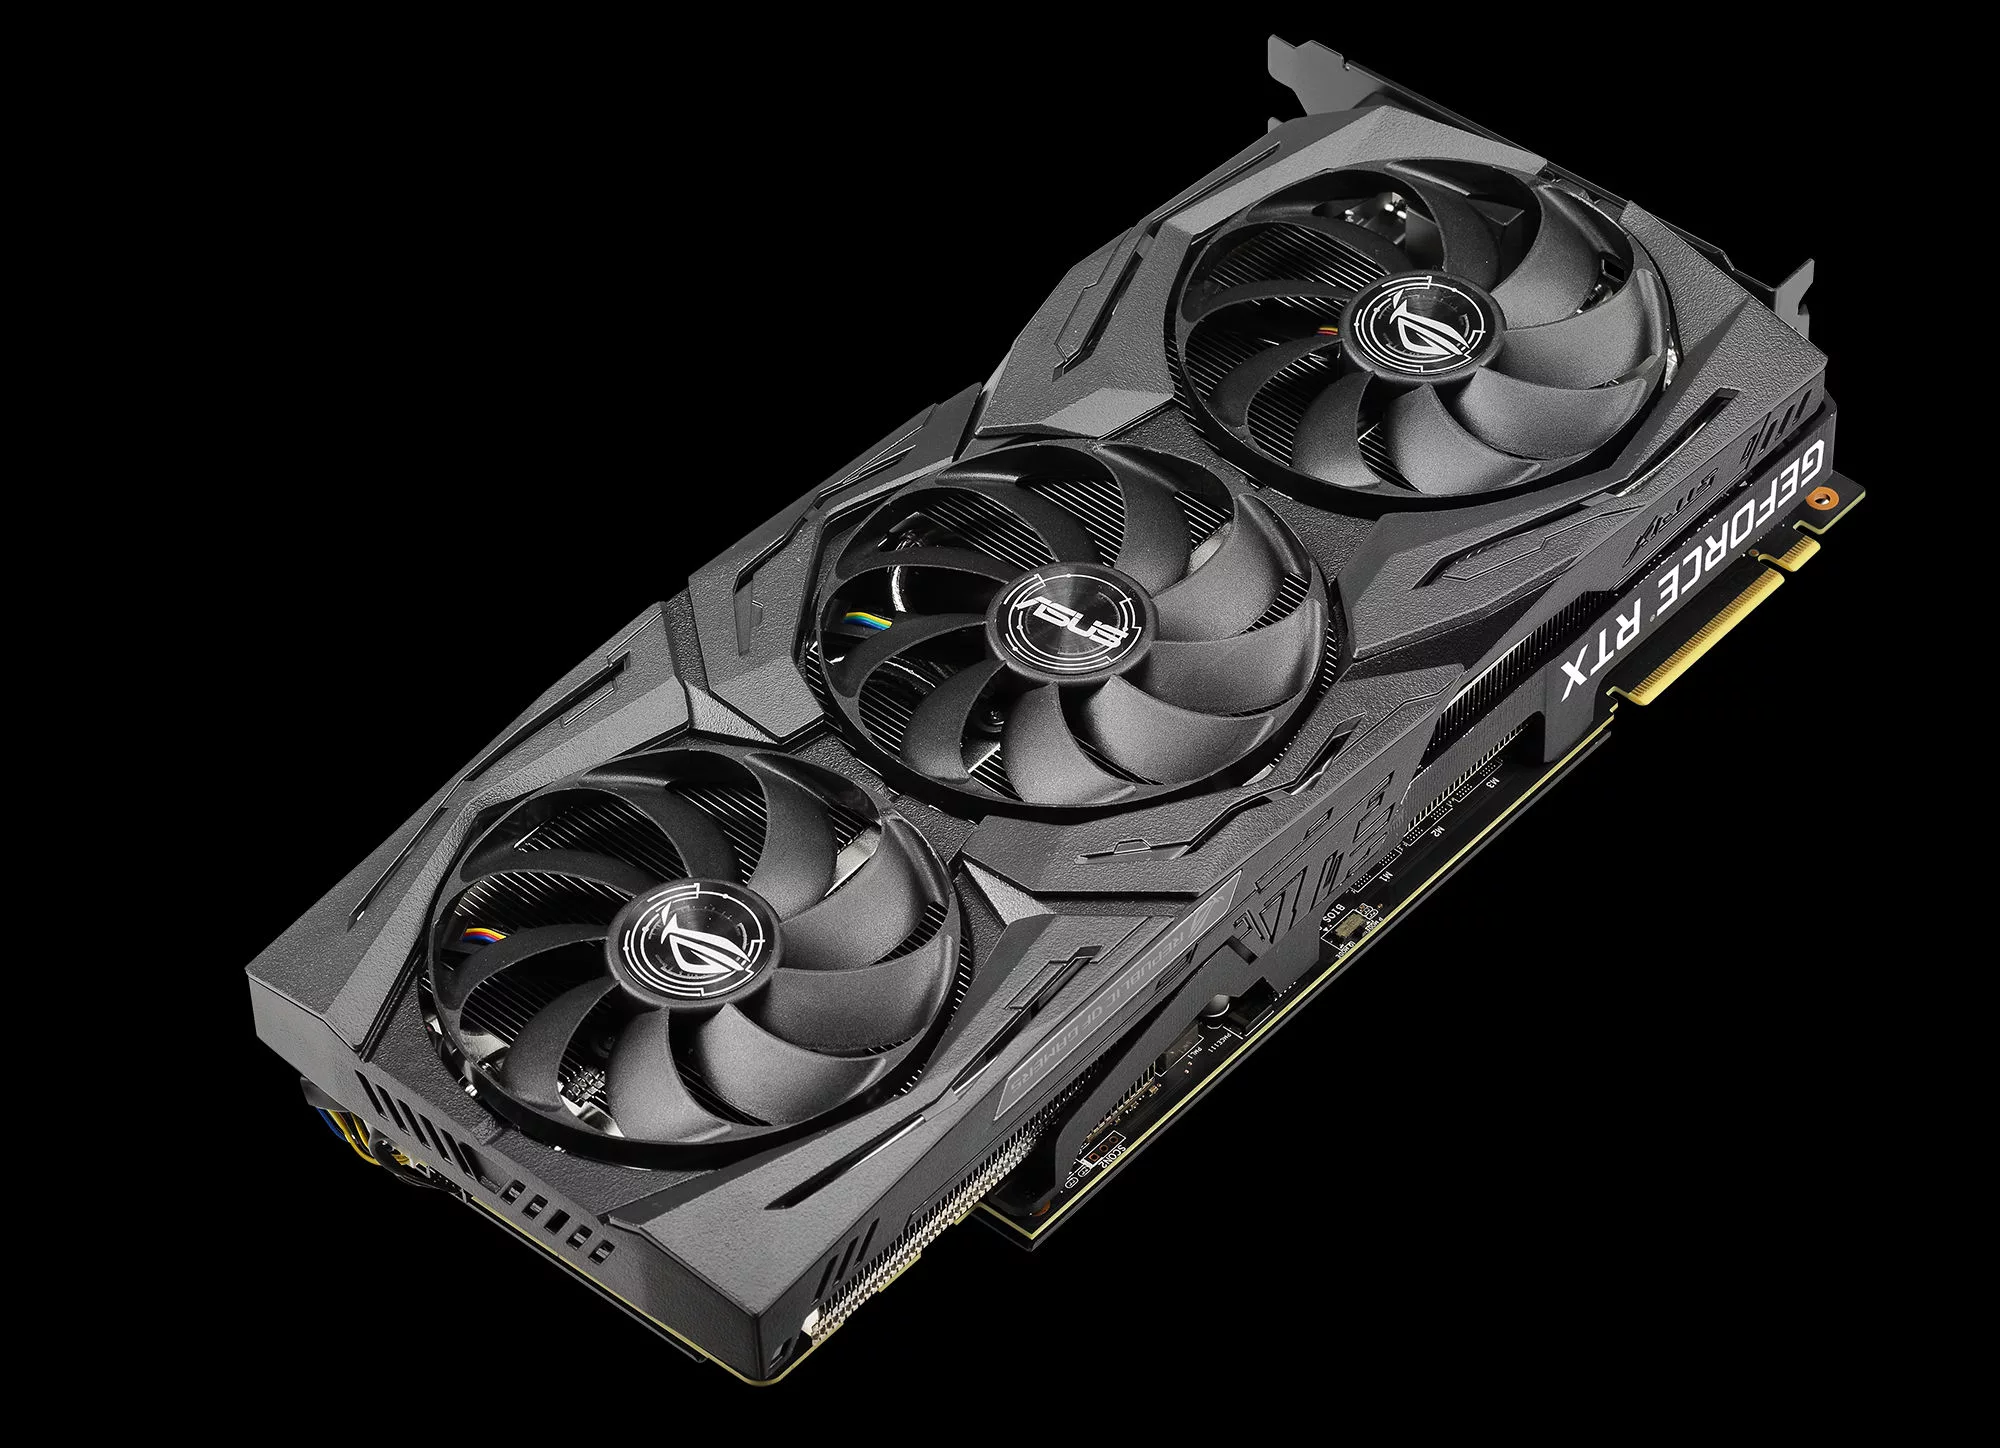 Introducing GeForce RTX 2080 Ti and RTX 2080 graphics cards from 